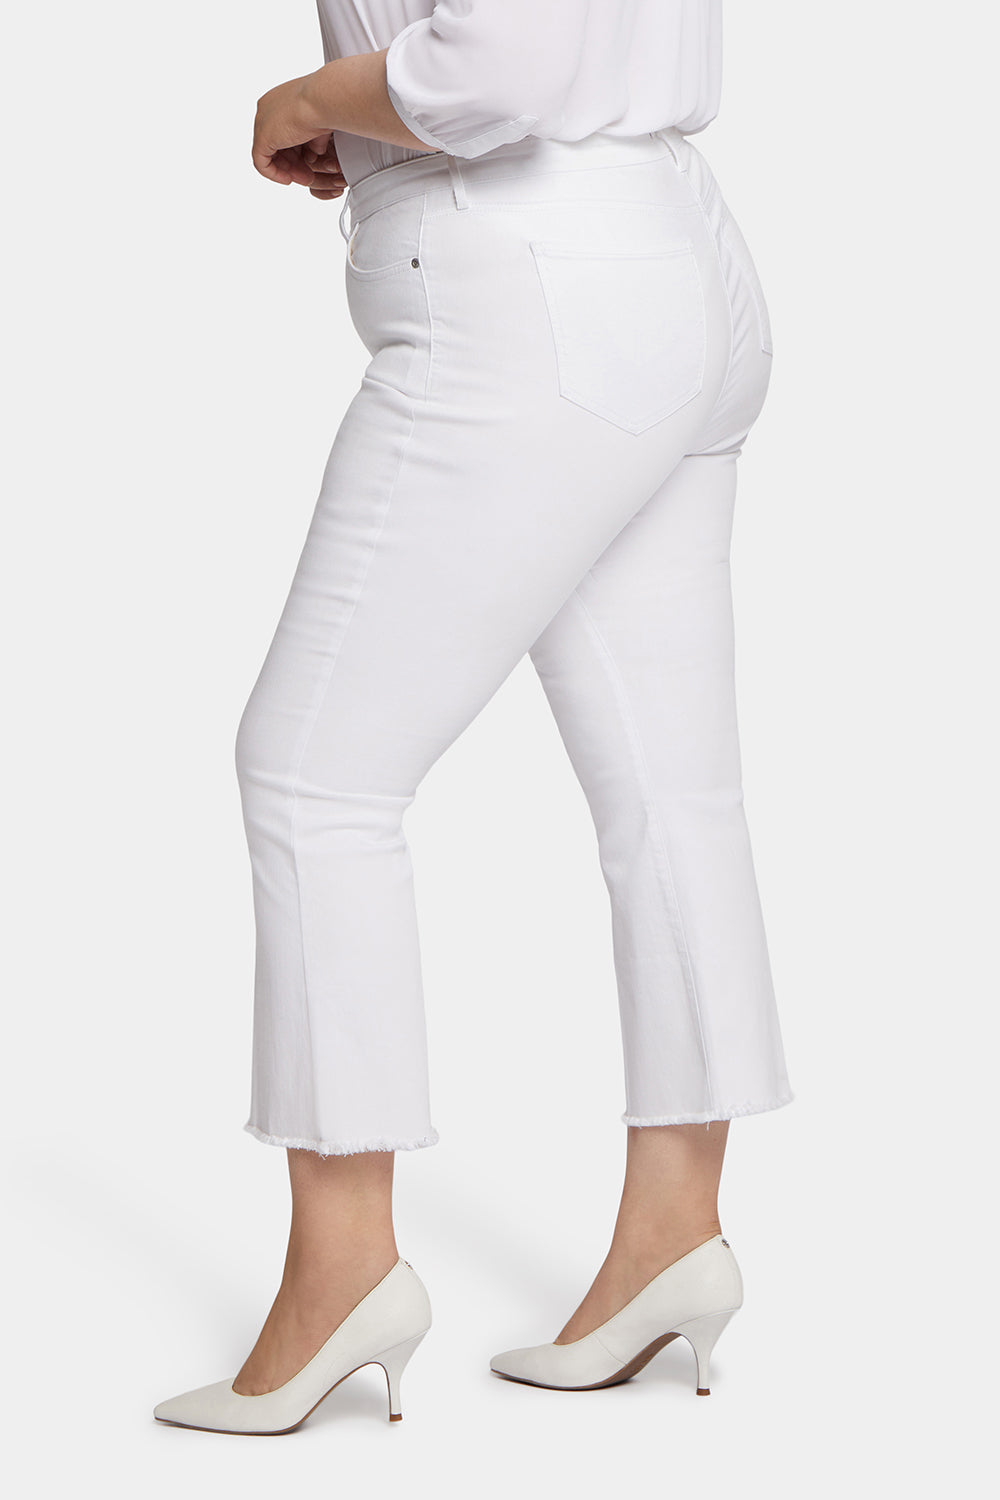 NYDJ Ava Flared Ankle Jeans In Plus Size With Frayed Hems - Optic White